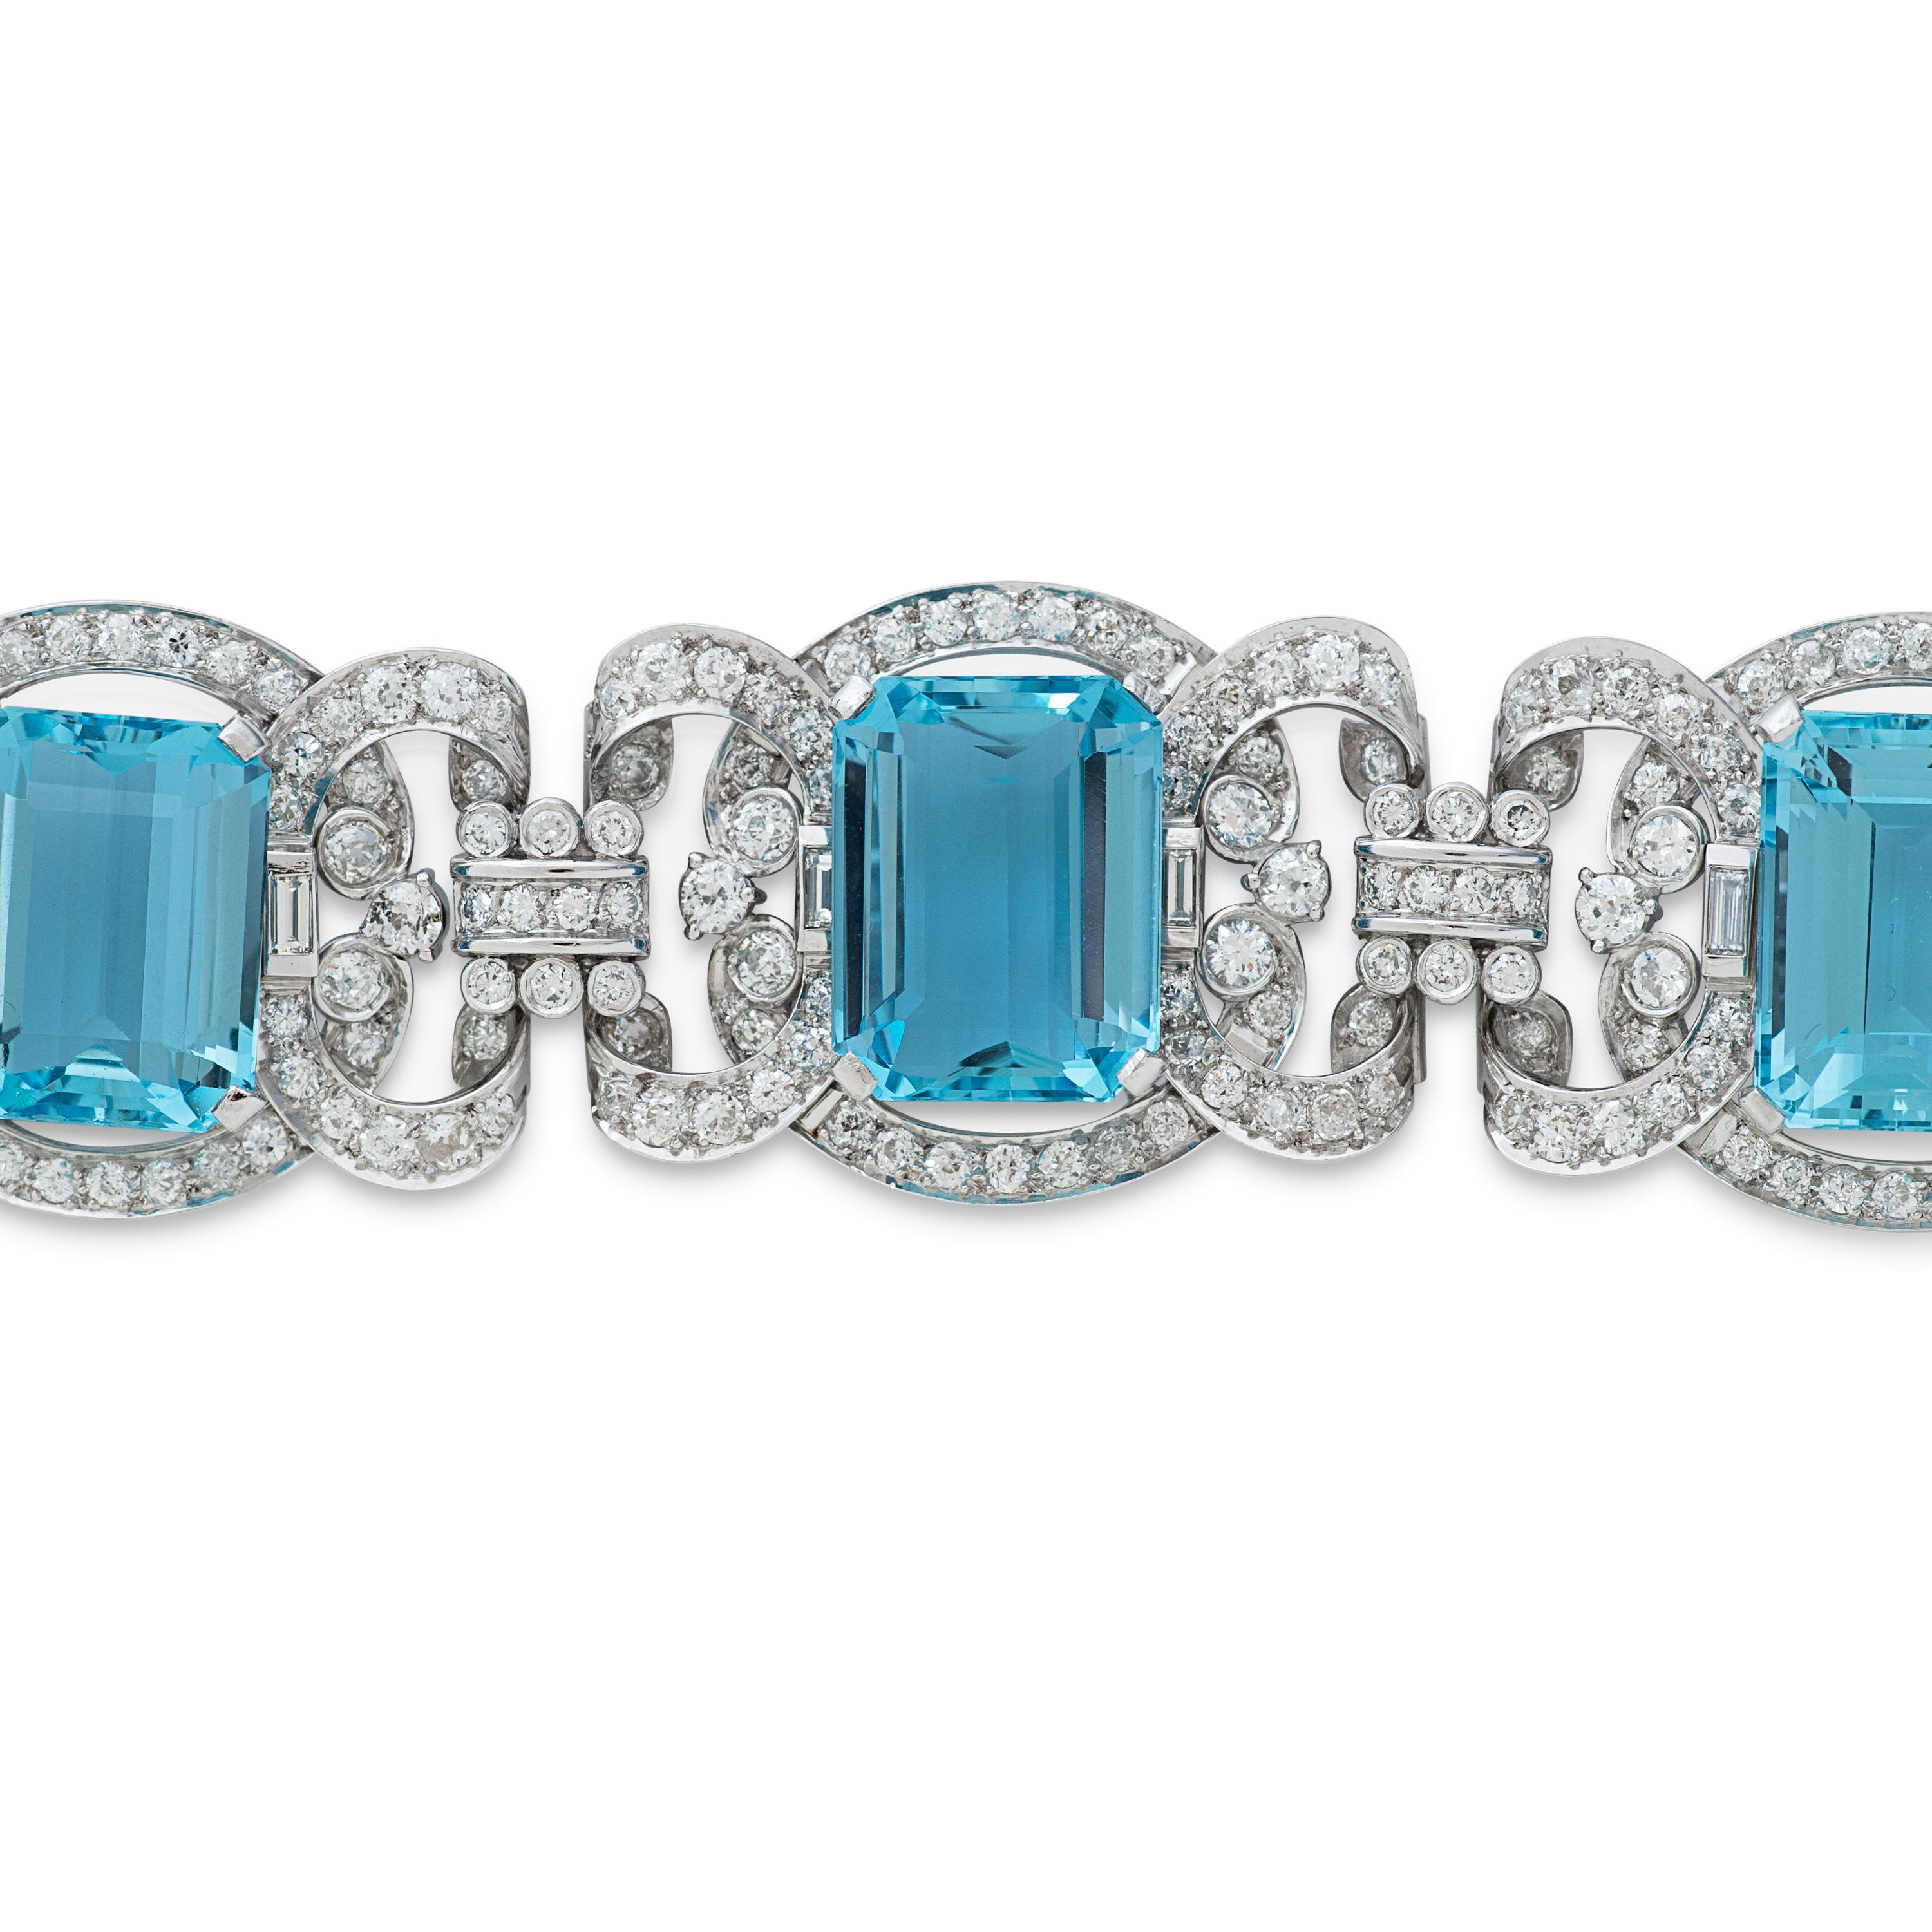 Art Deco aquamarine and diamond link bracelet with platinum setting.  5 emerald cut aquamarines 
totaling approximately 75.91ct are set amidst approximately 10.00ct of diamonds estimated to be 
G-H color with VS clarity.  
This bracelet measures